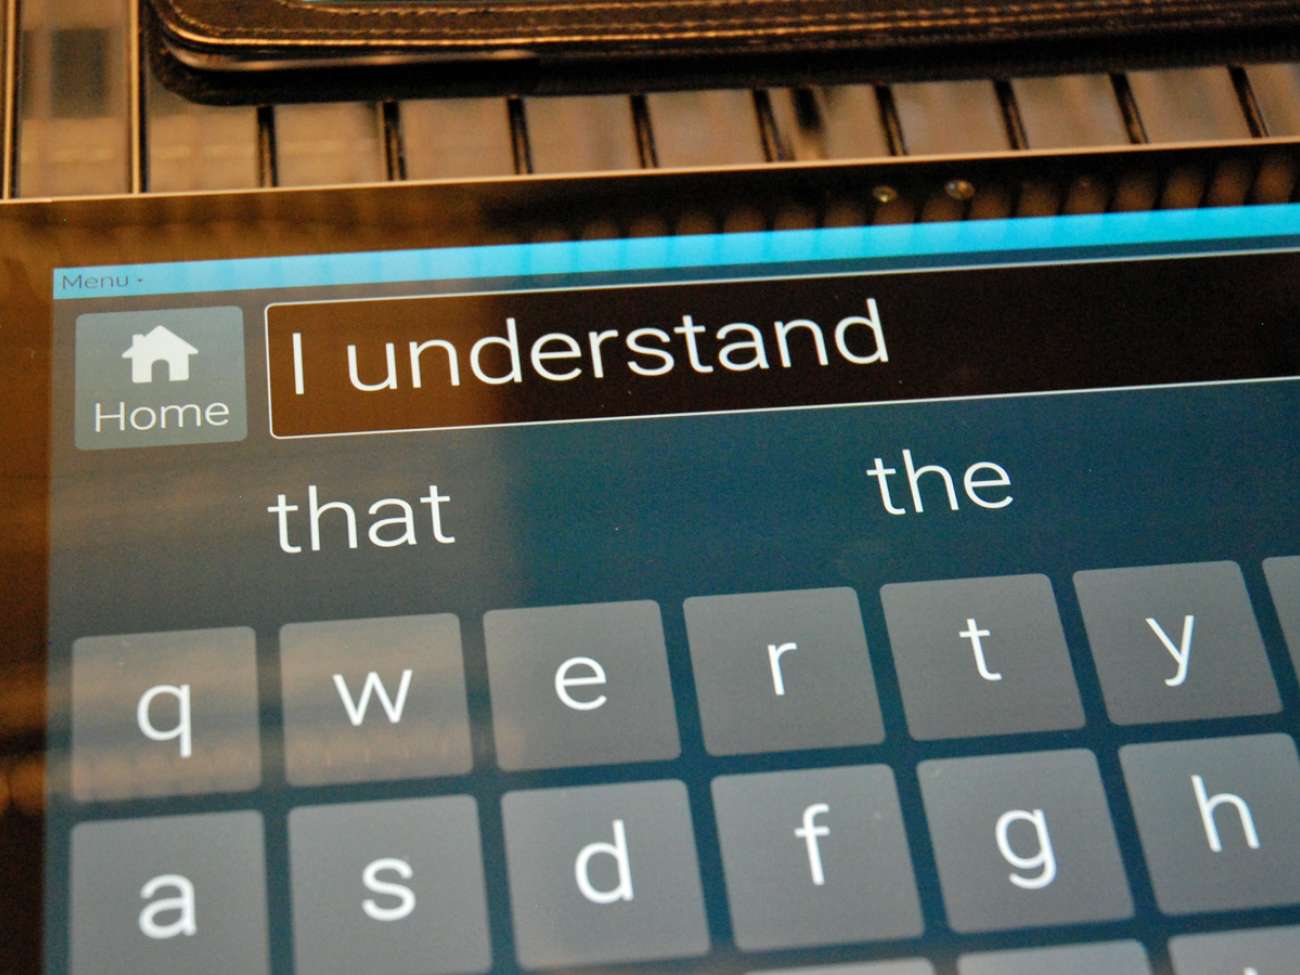 Tablets that can predict the writer's next word are important devices to help clients regain their means to communicate